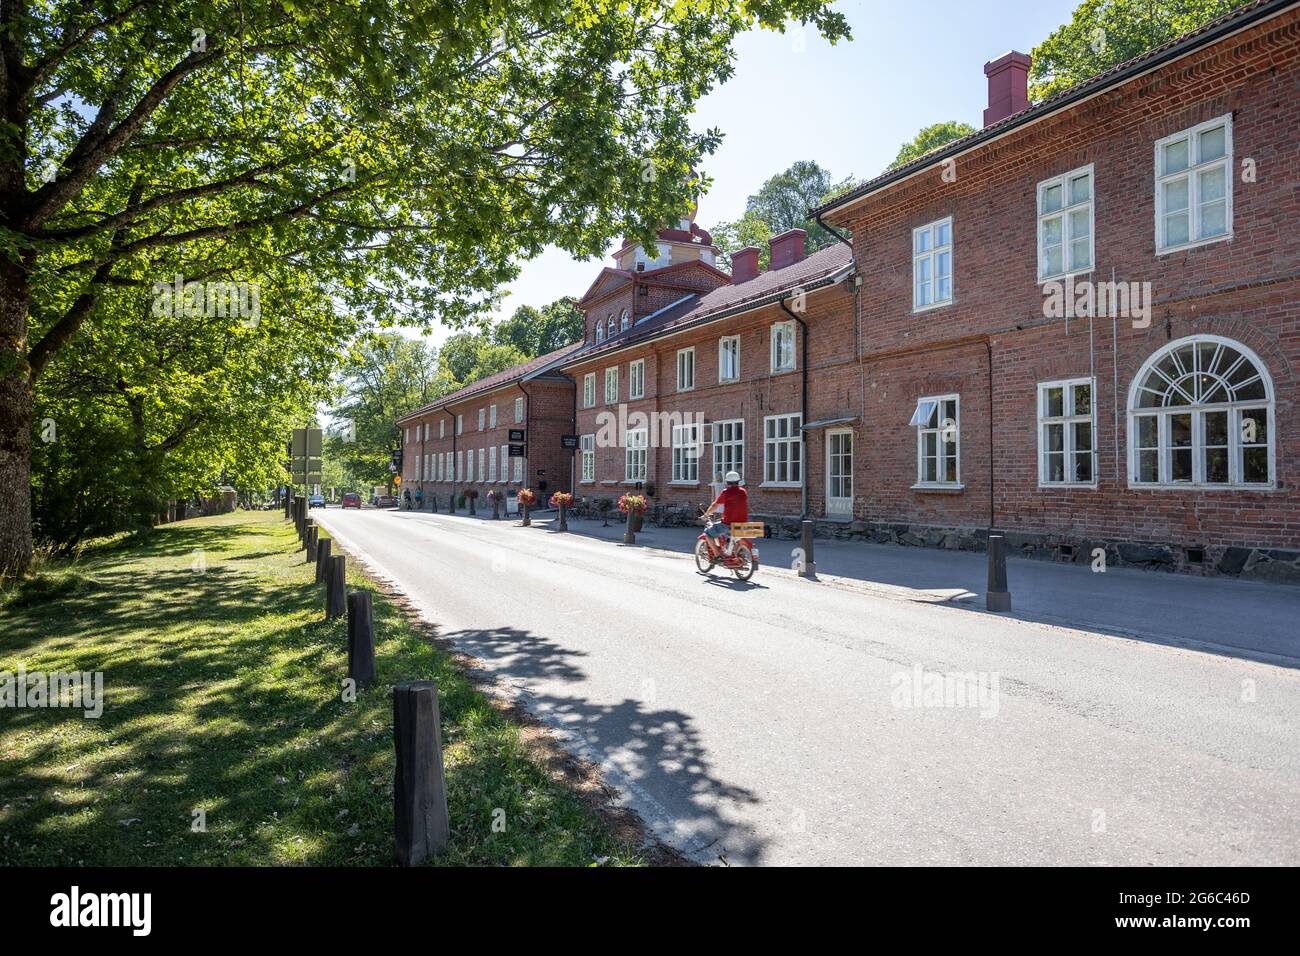 The main street in the Fiskars village, a historical ironworks area and popular travel destination. Stock Photo